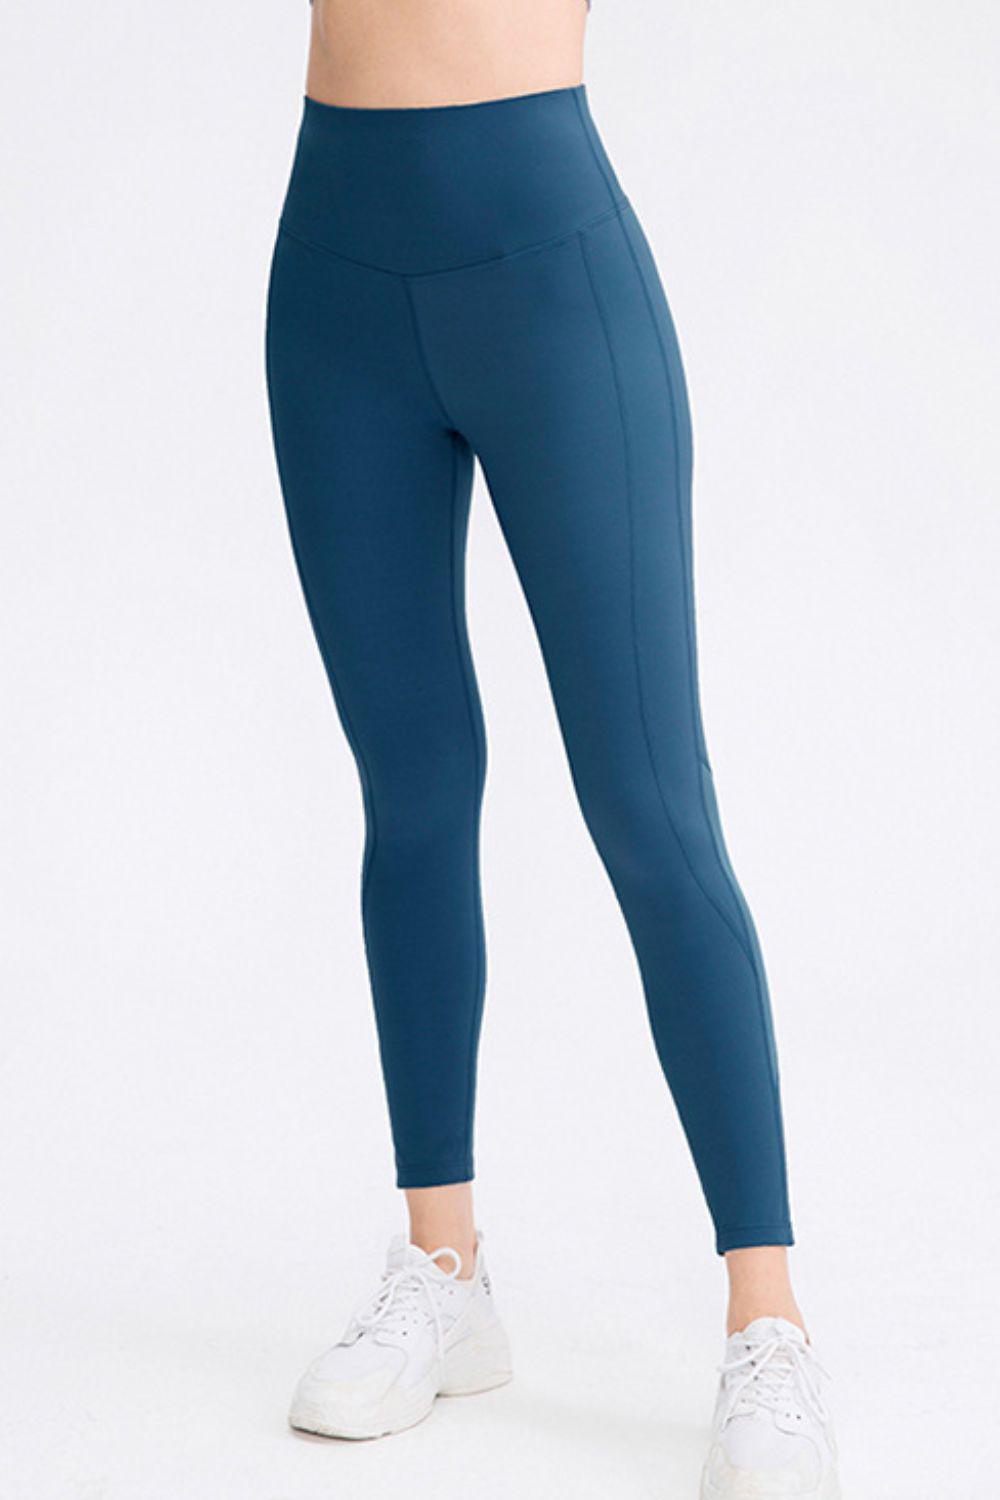 Wide Waistband Slim Fit Long Sports Pants BLUE ZONE PLANET